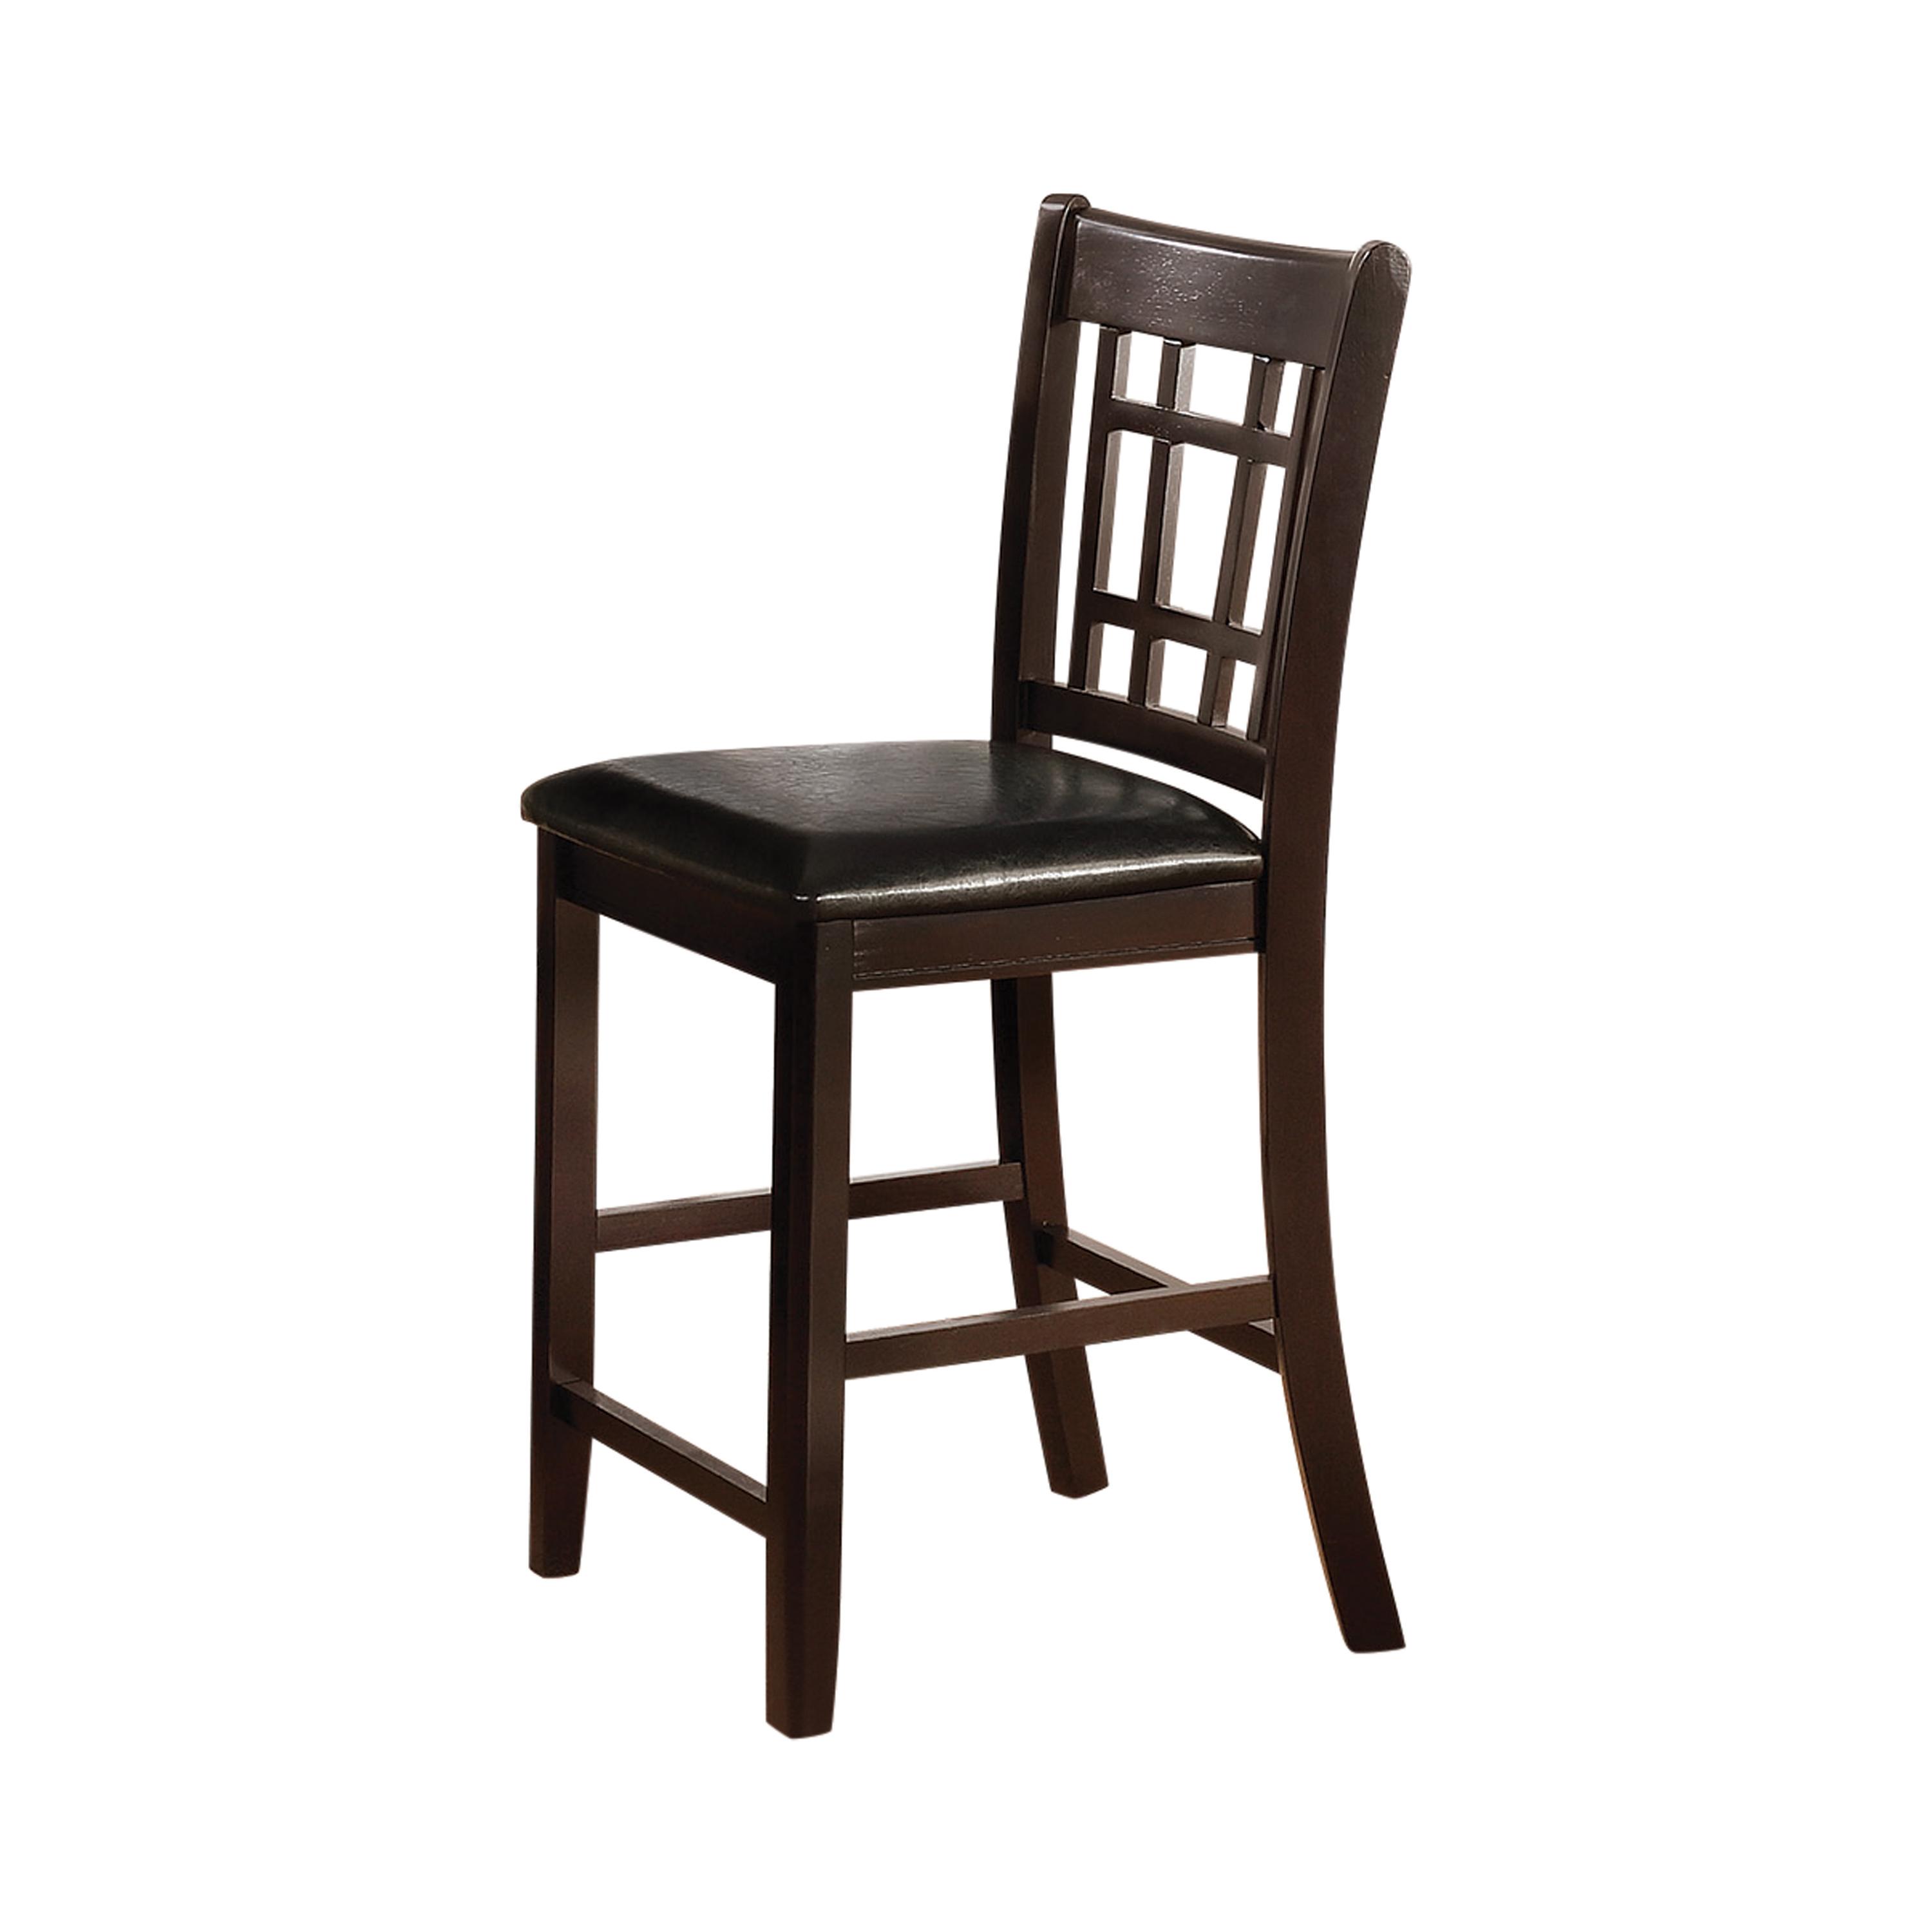 Transitional Counter Stool Set 102889 Lavon 102889 in Espresso Leatherette